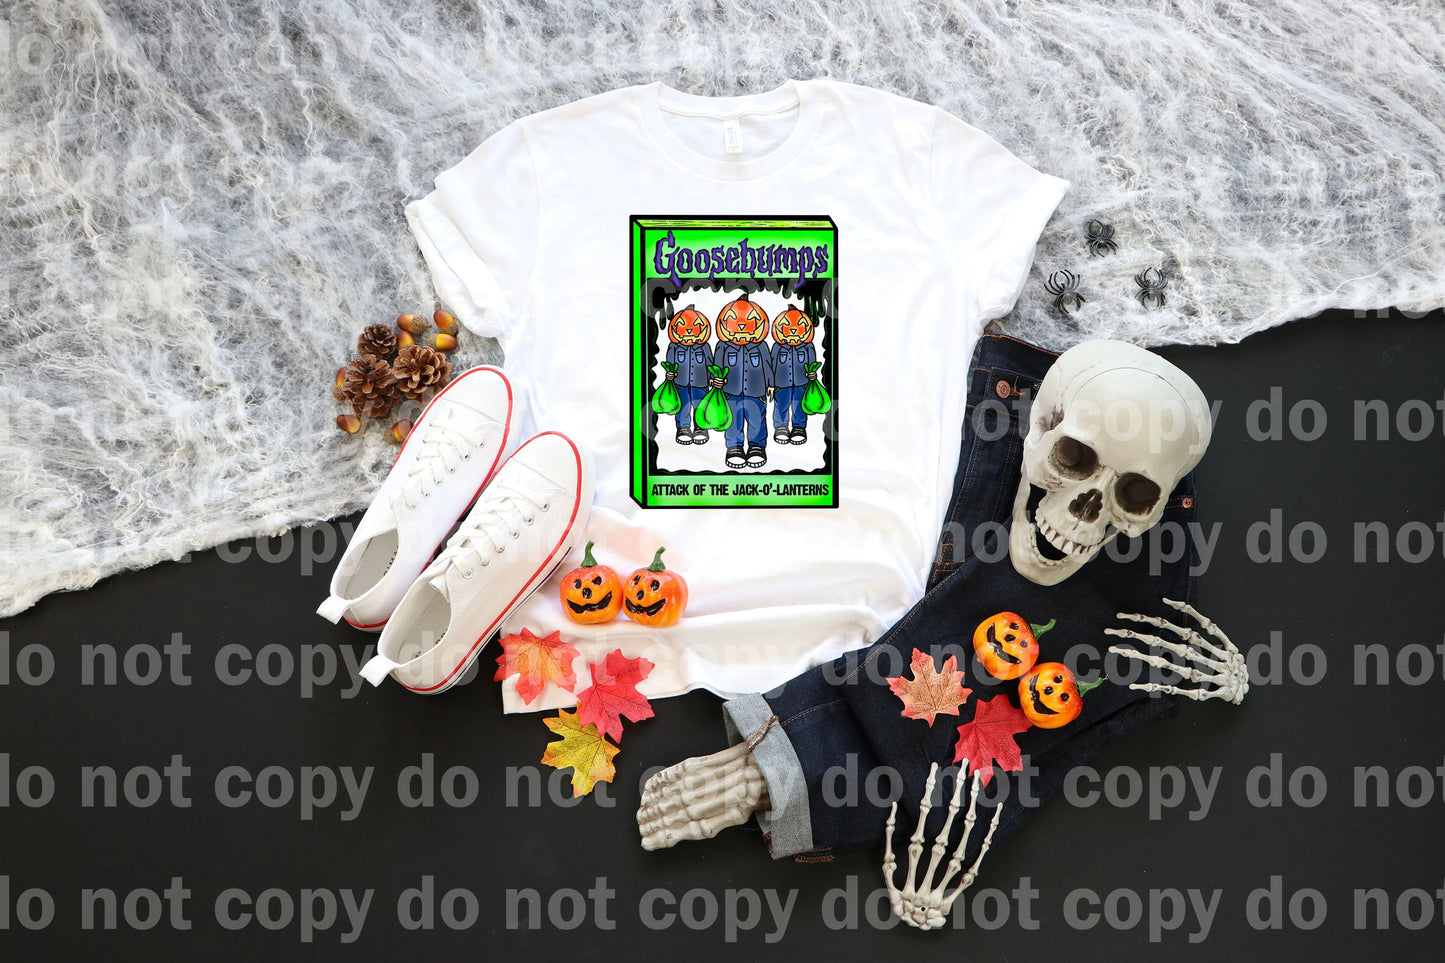 Goosebumps Attack Of The Jack Dream Print or Sublimation Print